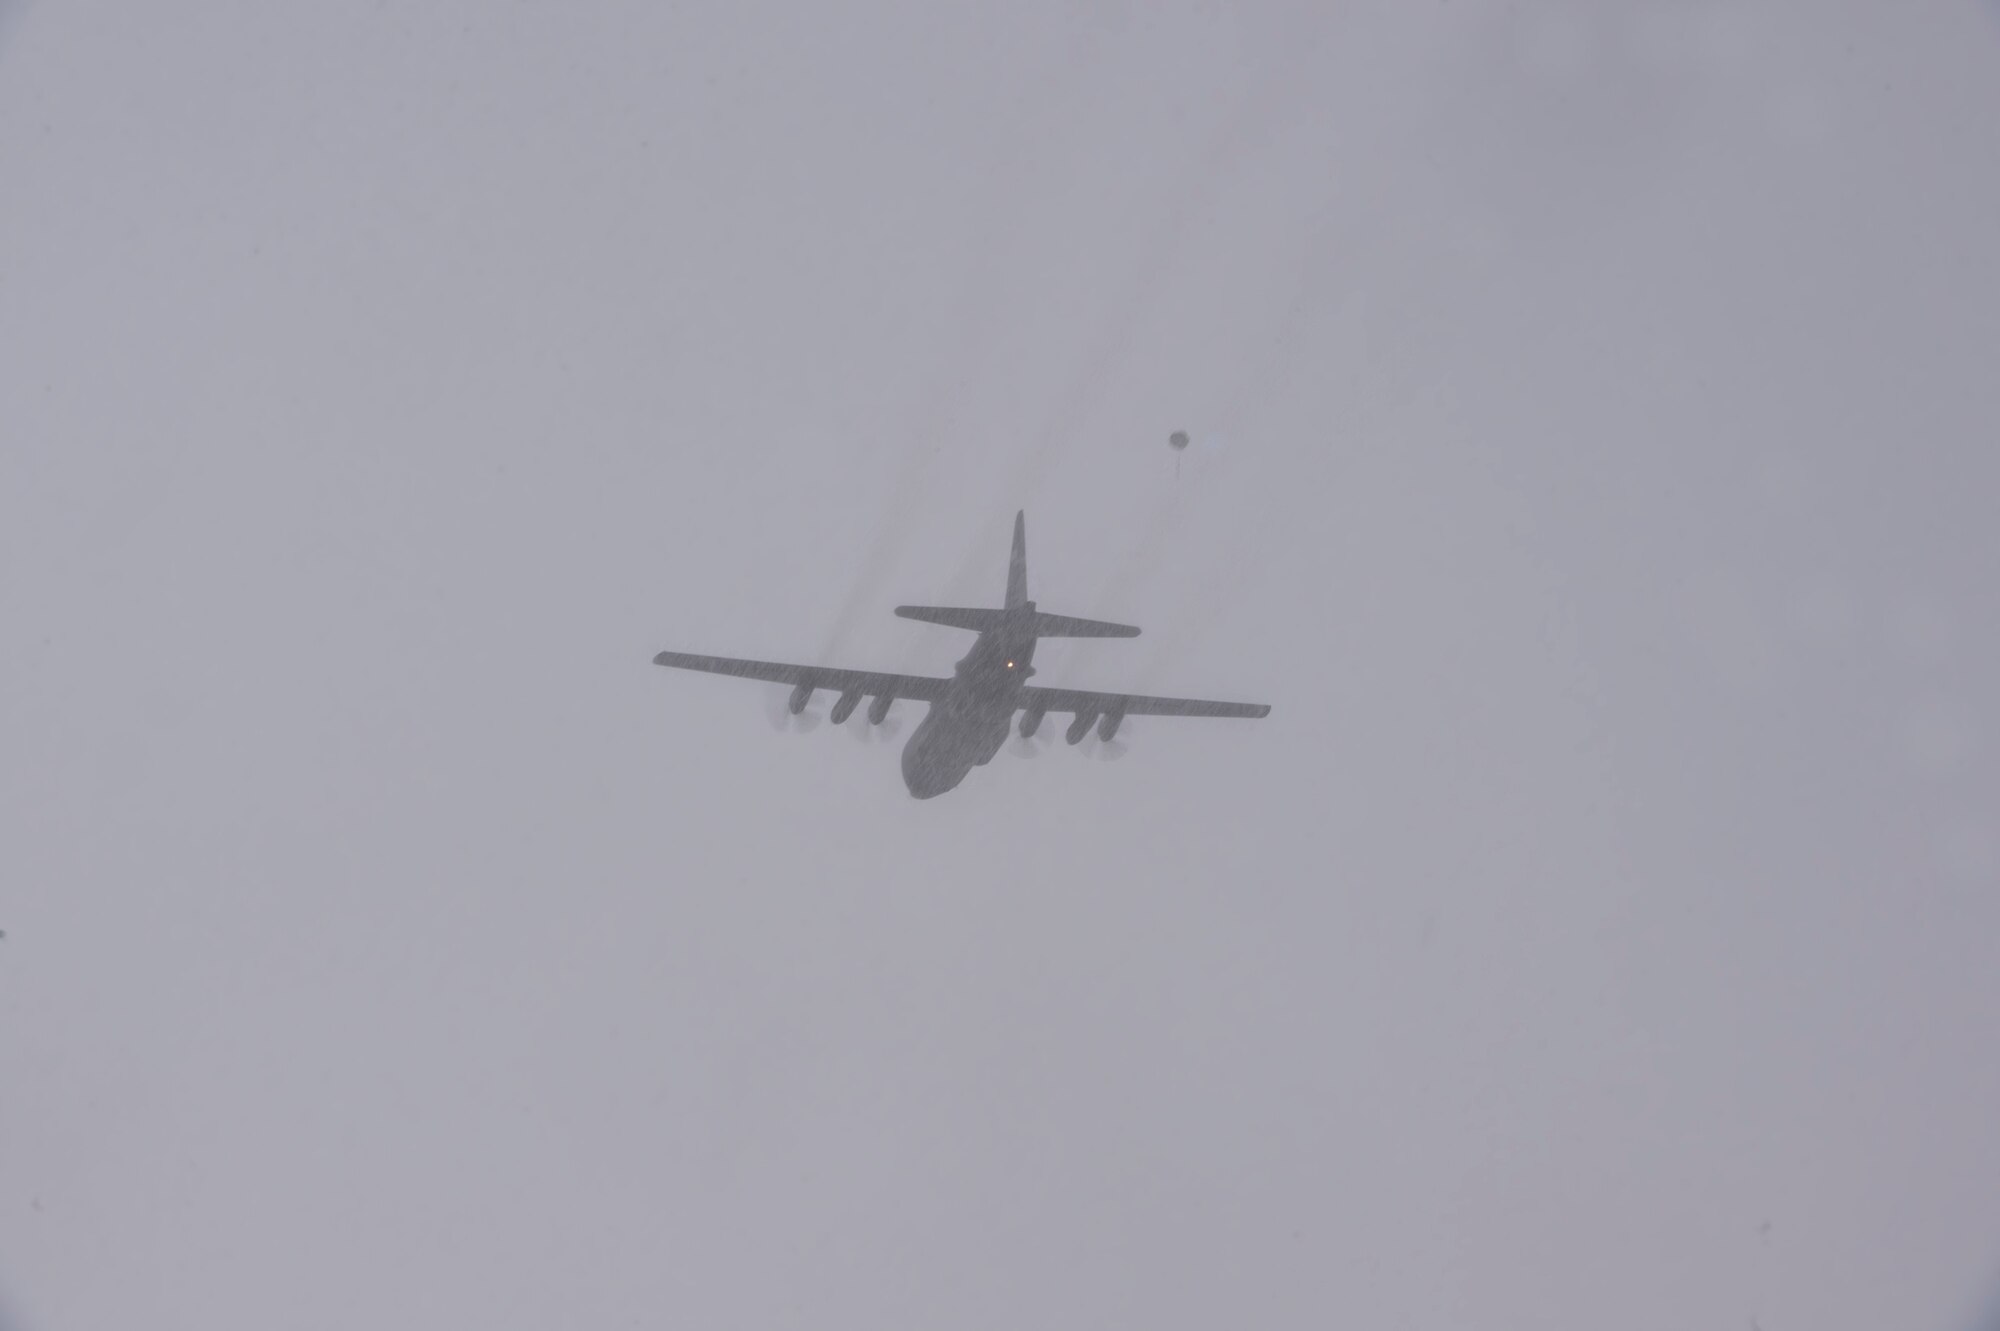 A C-130 Hercules assigned to the 36th Airlift Squadron, Yokota Air Base, Japan, drops a standard training bundle on Draughon Range near Misawa Air Base, Japan, Jan. 31, 2017. The STB is a smaller alternative to use than a full load, while providing pilots and navigators the training they need. (U.S. Air Force photo by Tech. Sgt. Araceli Alarcon)